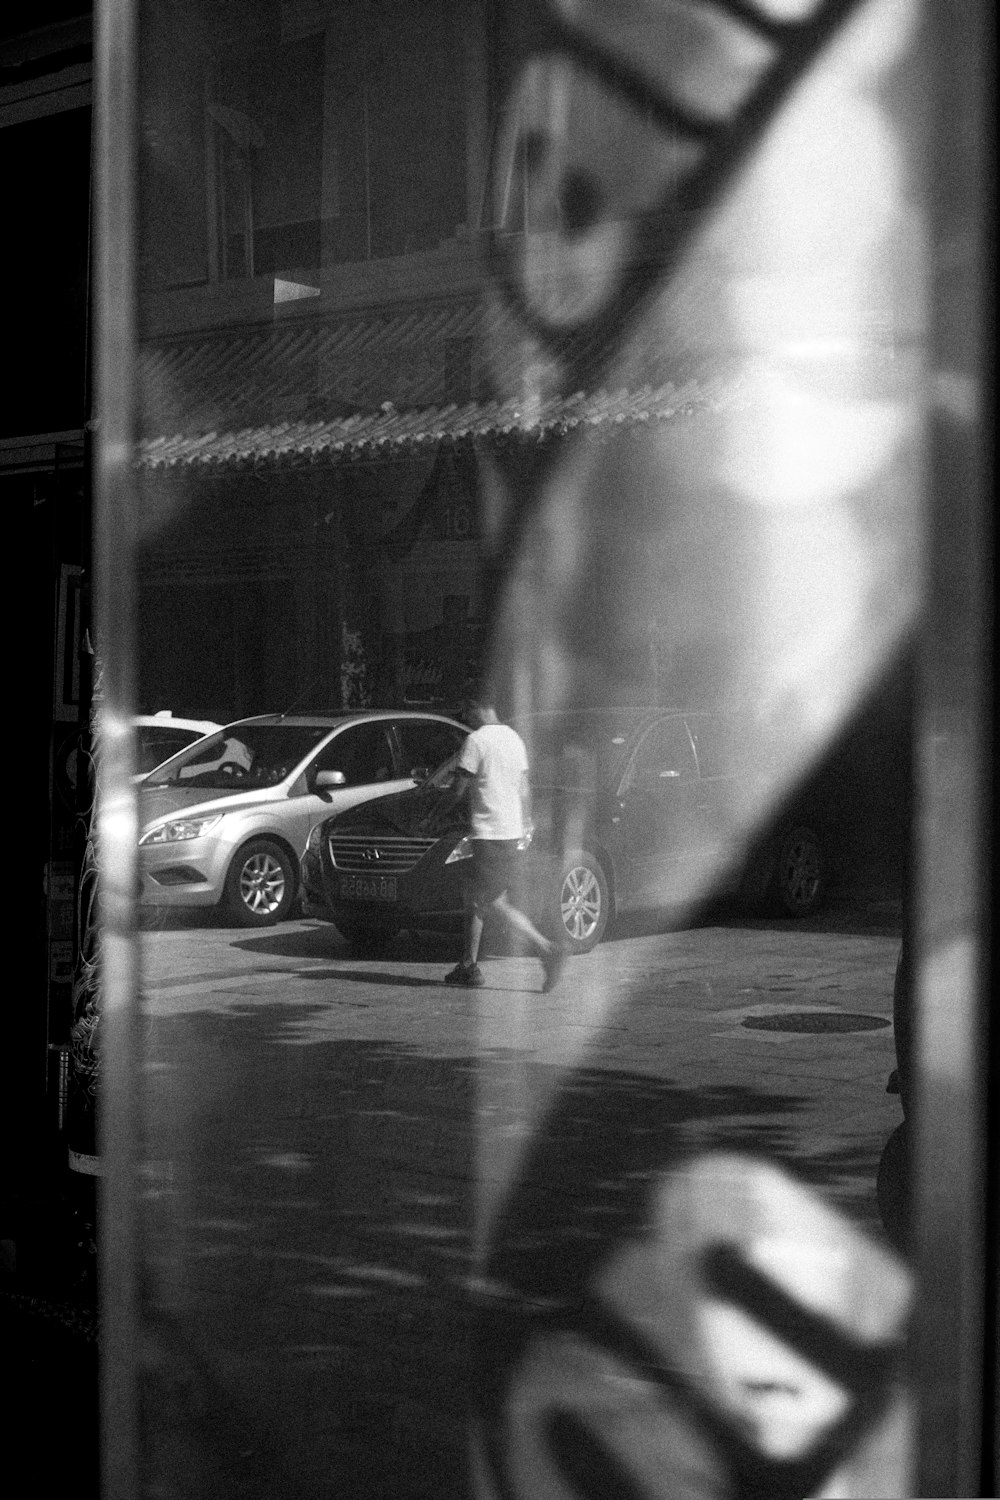 a man walking down a street next to parked cars